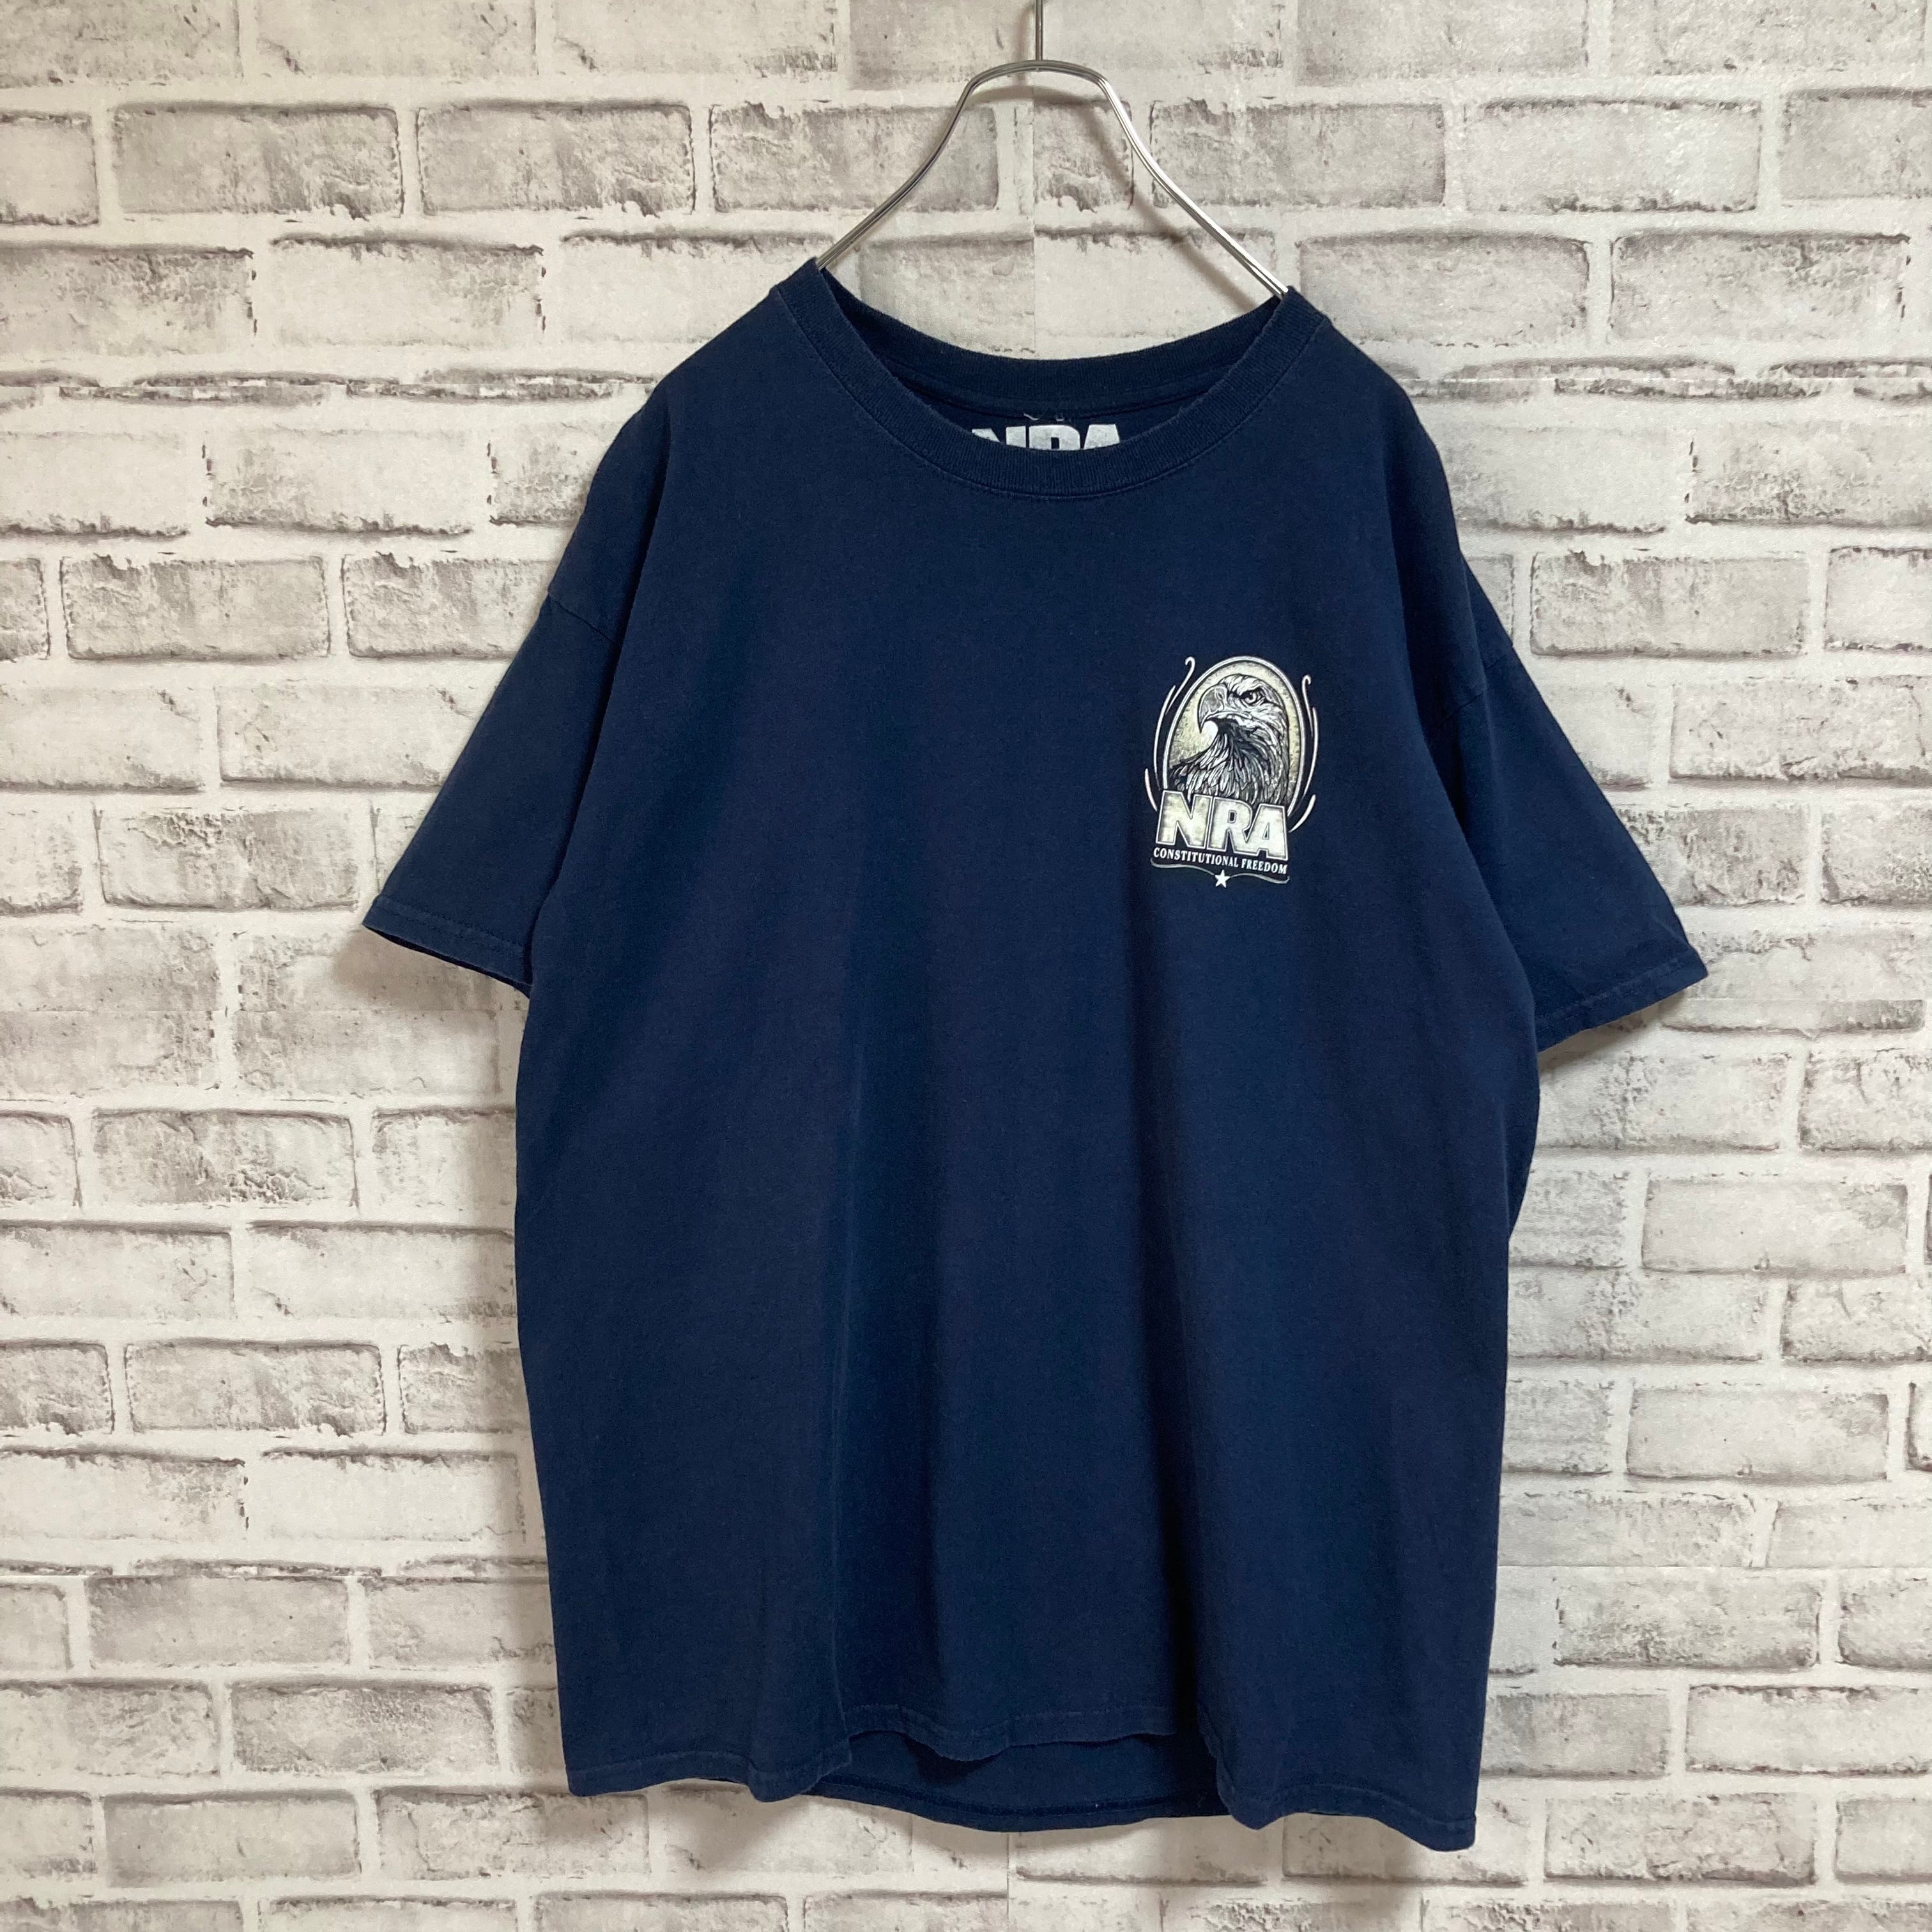 NRA】S/S Tee L 全米ライフル協会 バックプリント 両面プリント T